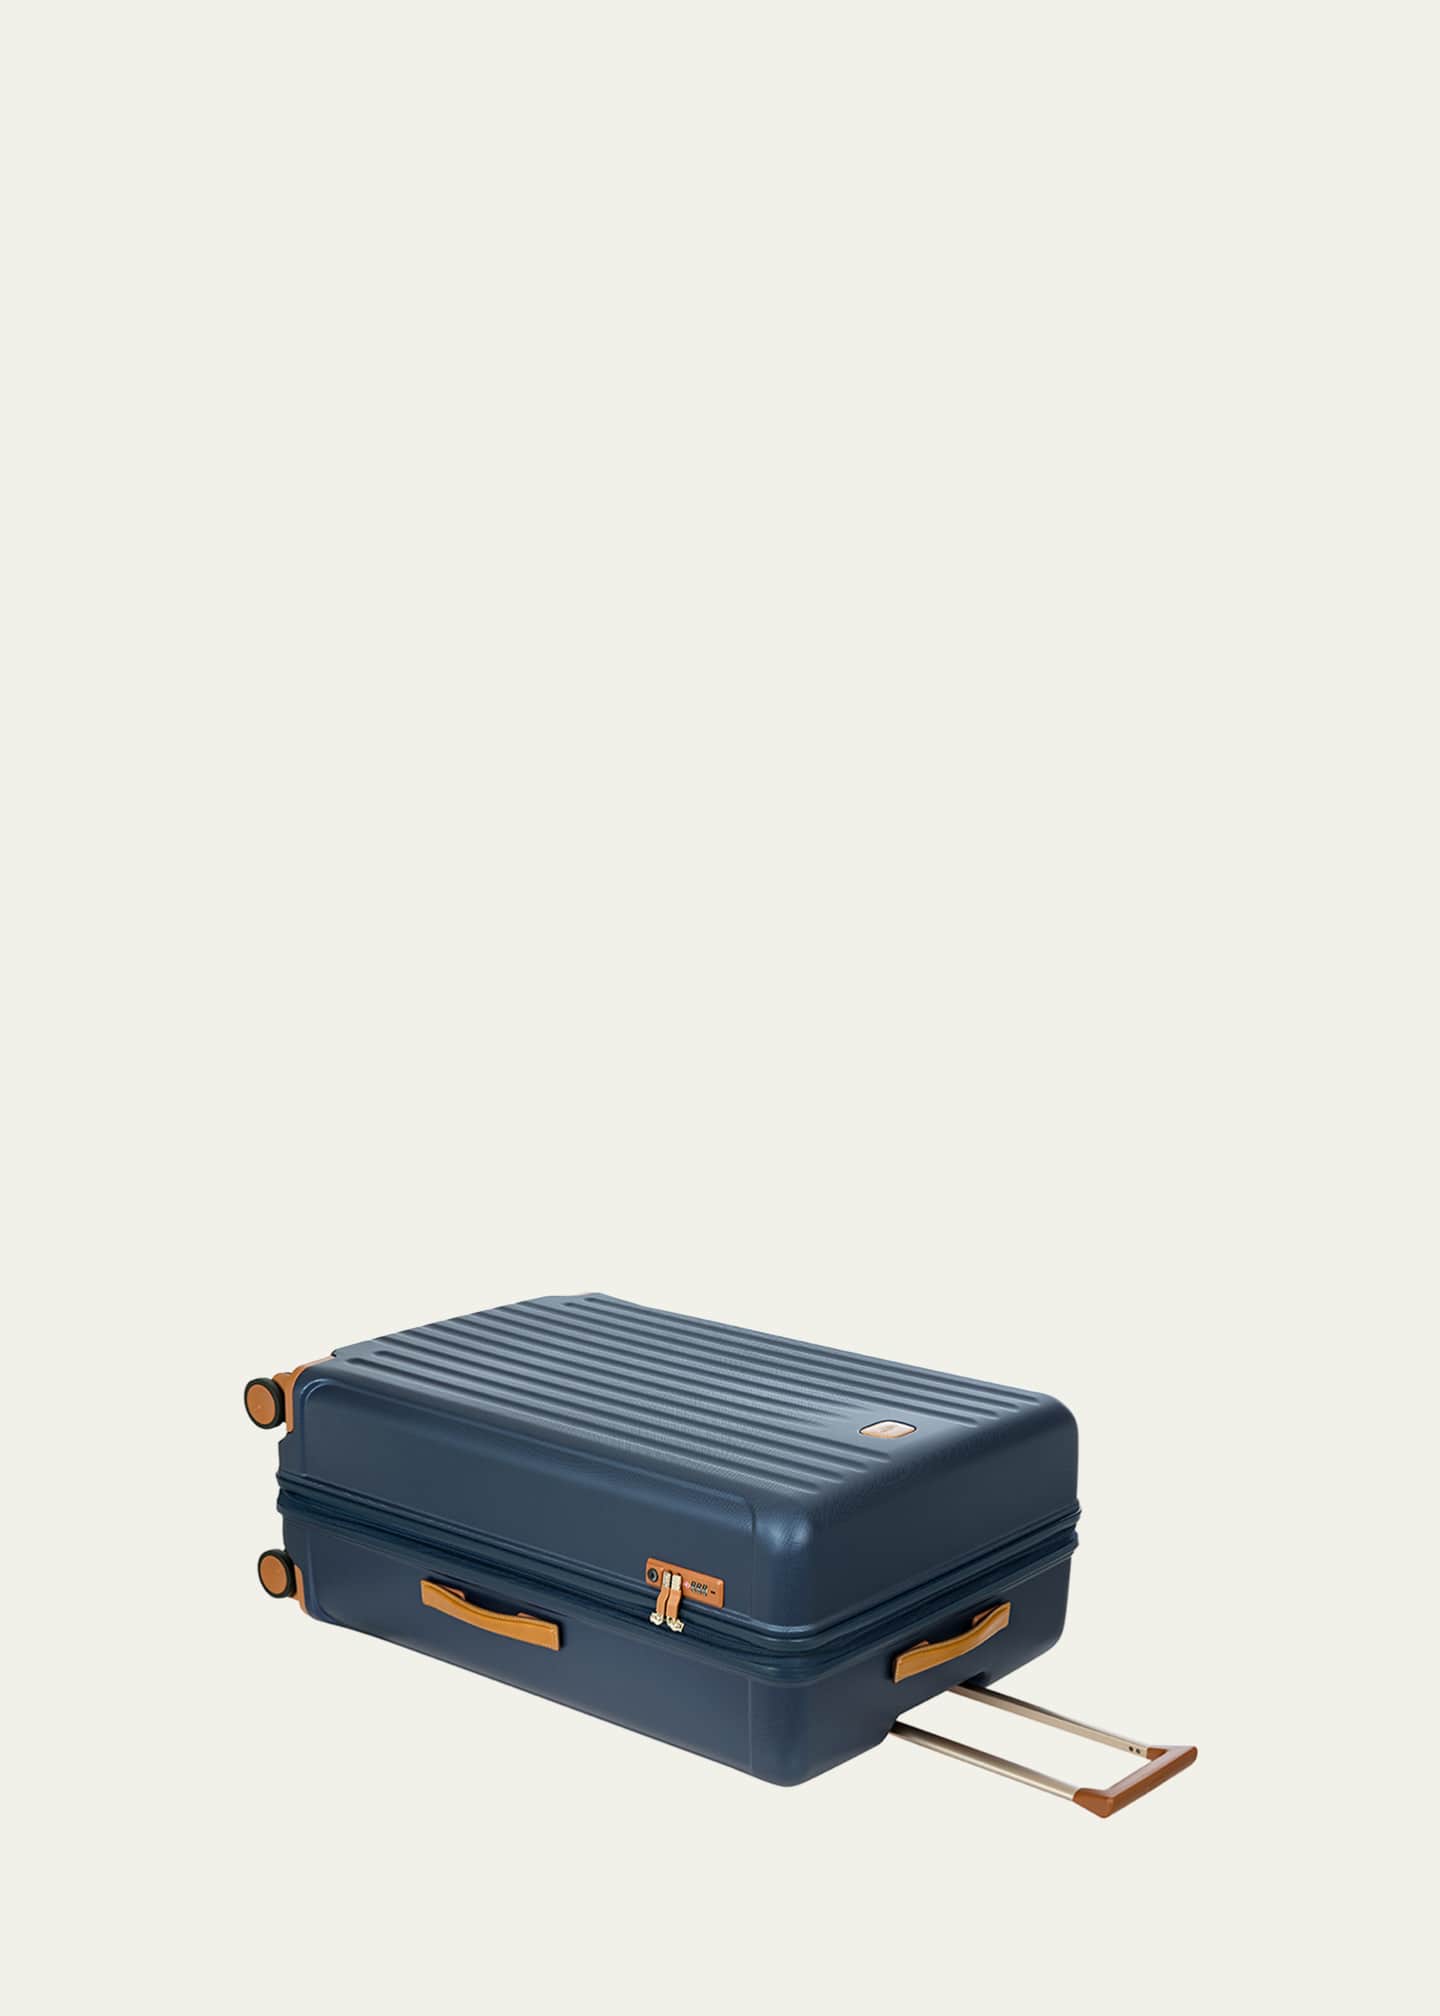 Bric's Capri 2.0 32" Spinner Expandable Luggage Image 2 of 4